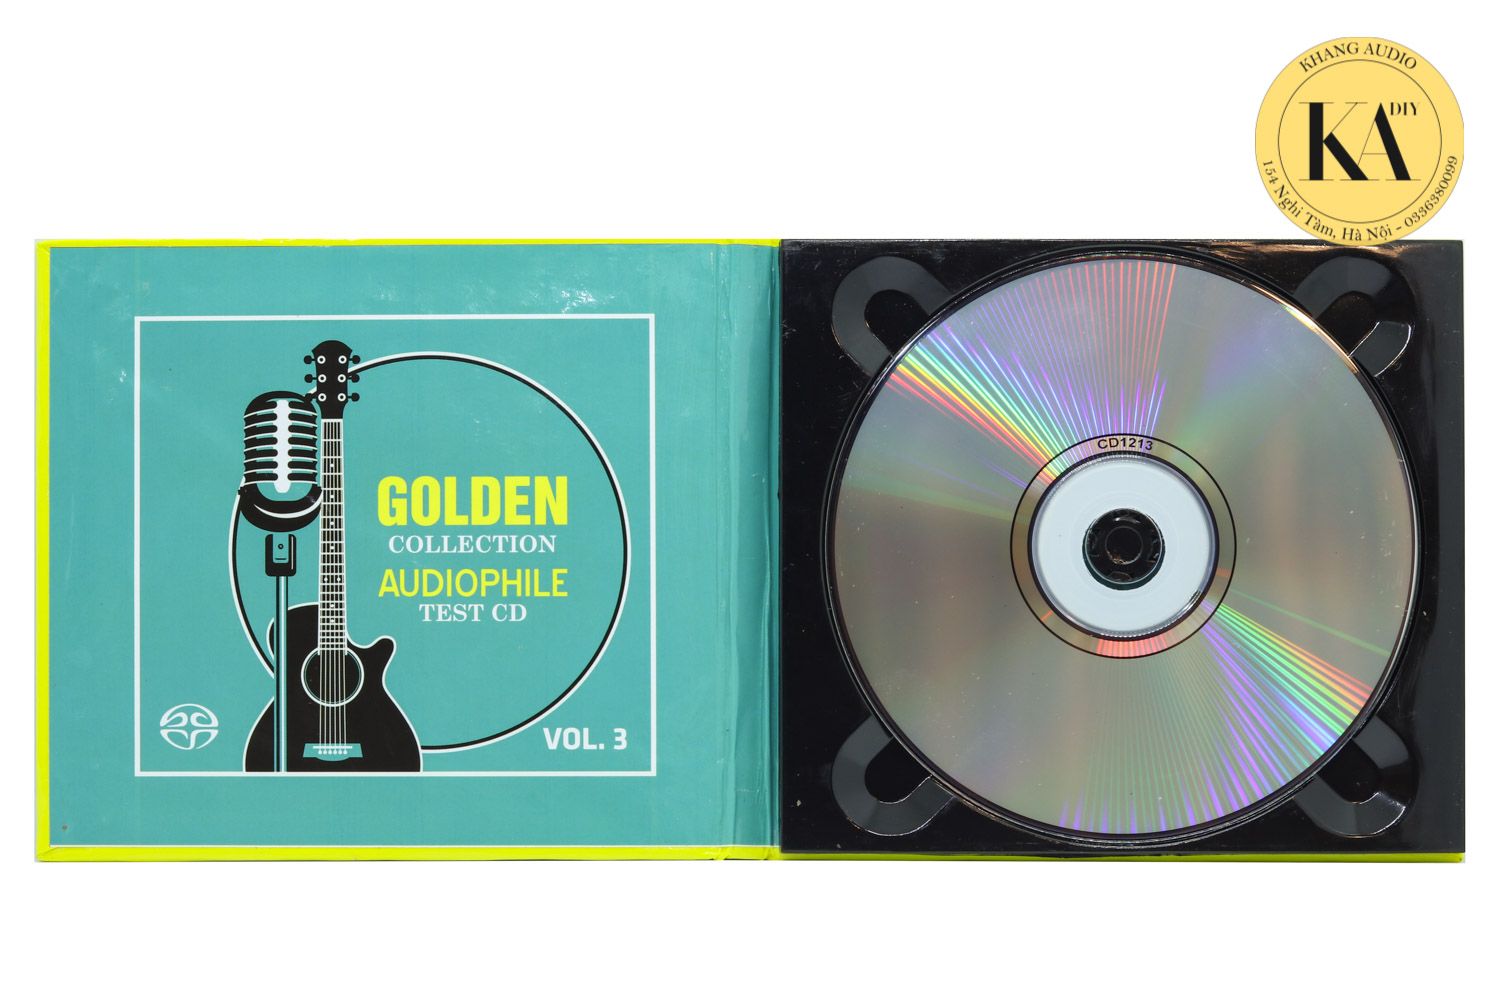 Golden Collection Audiophile Test CD Khang Audio 0336380099